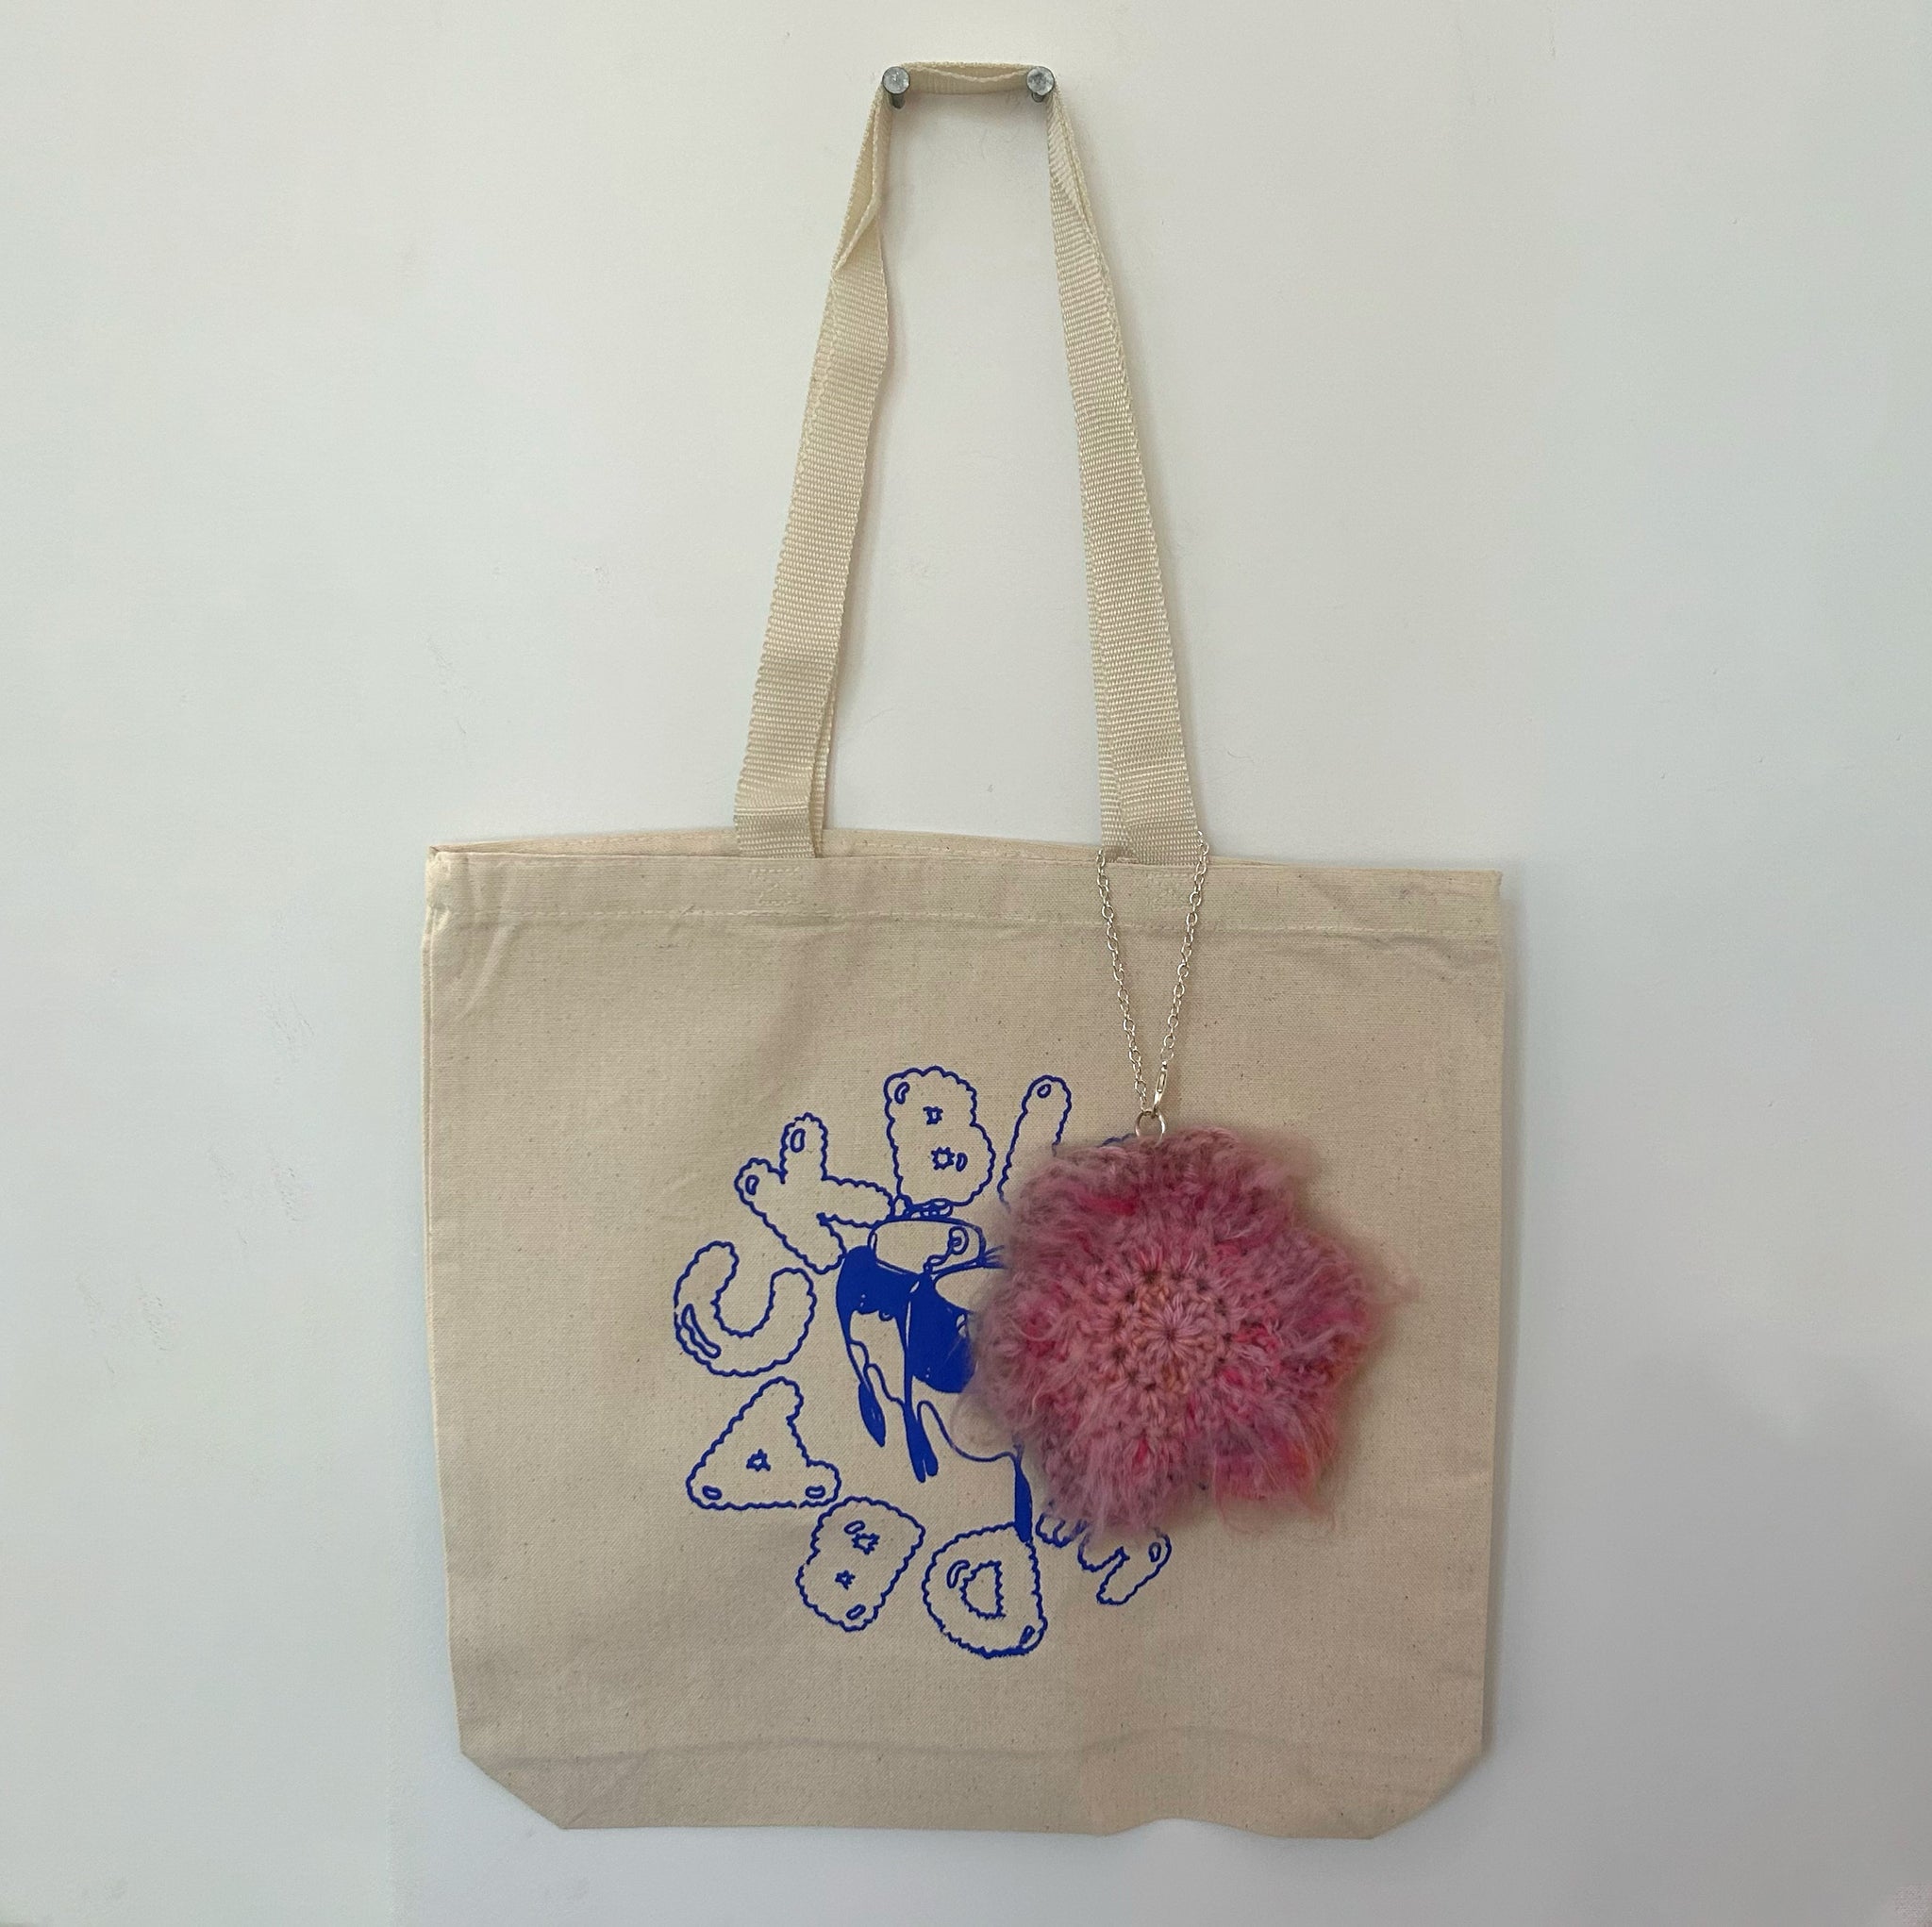 Biofeedback Tote with Charm